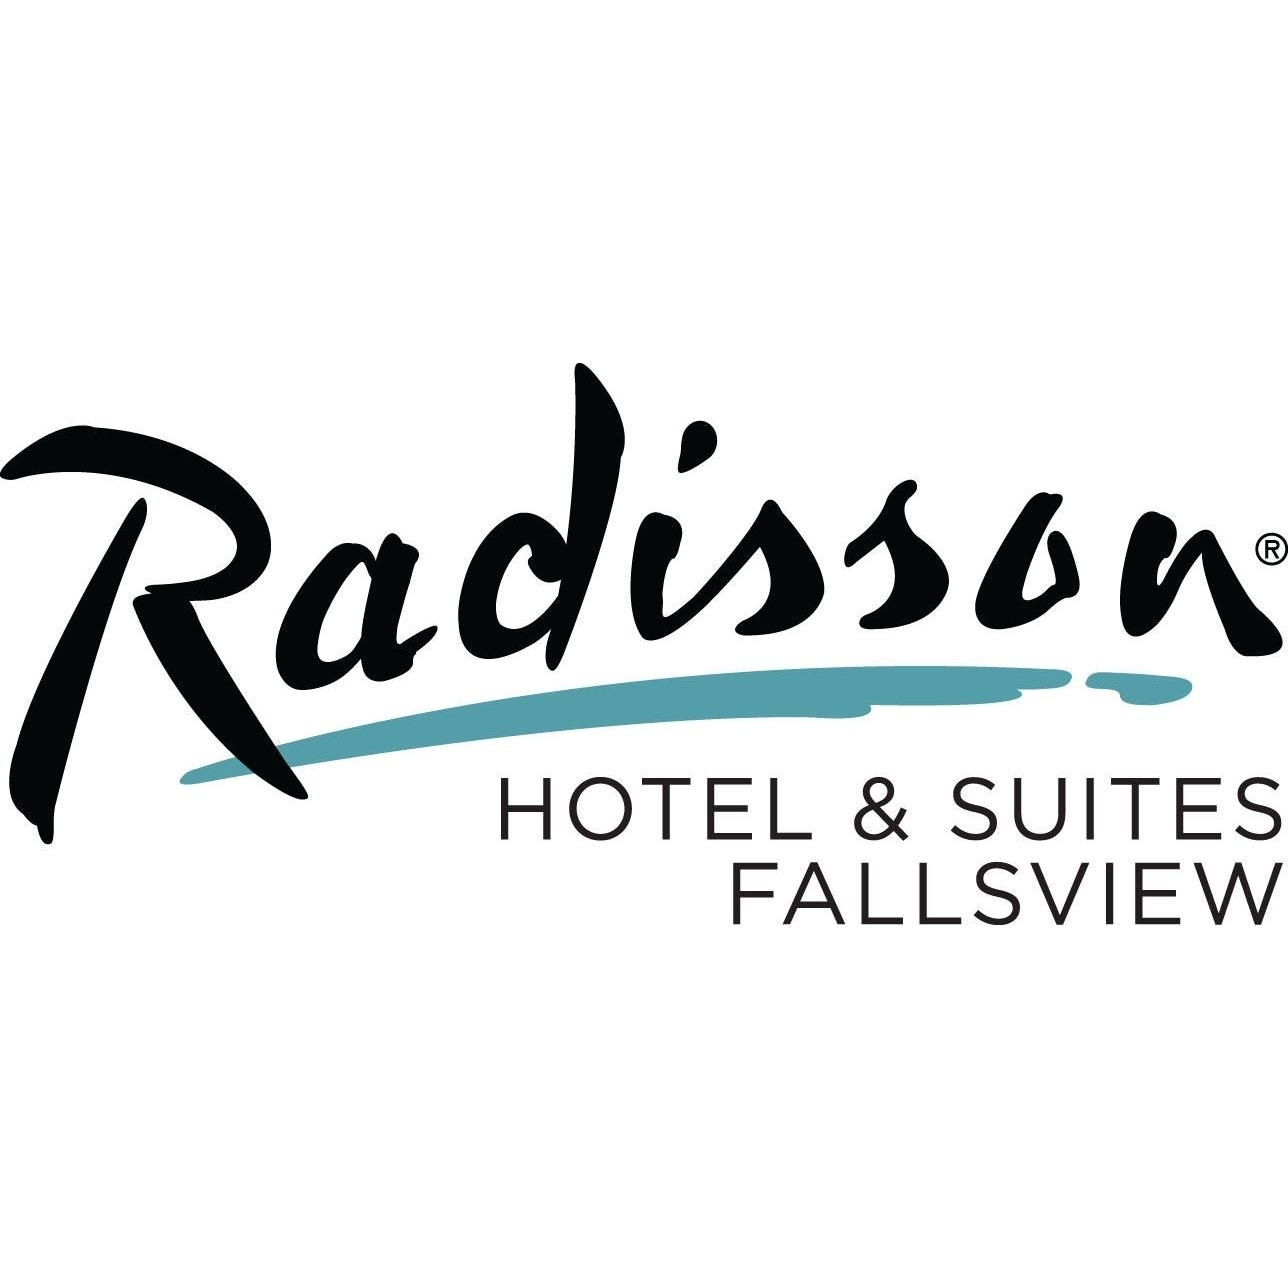 Radisson Hotel & Suites Fallsview, ON - Hotels